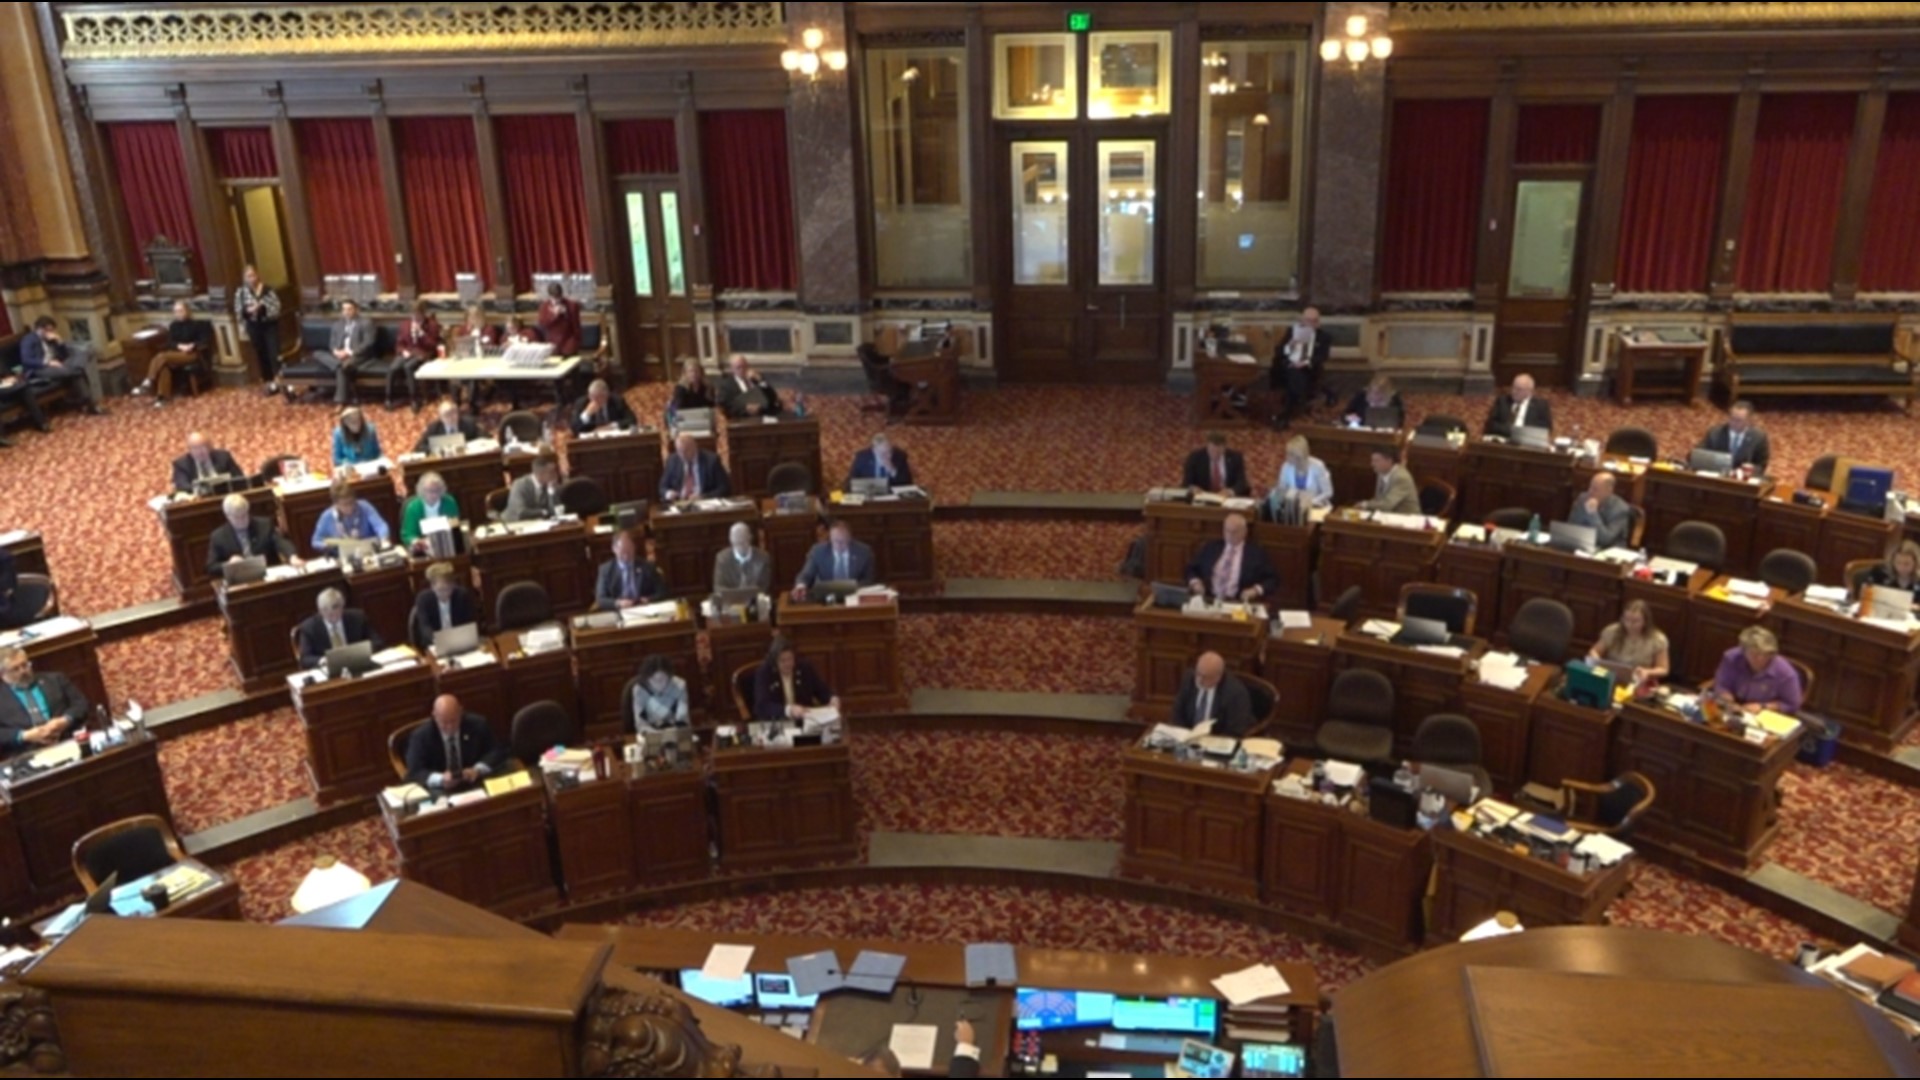 The bill would allow Iowa officials to classify illegal reentry into the state as an aggravated misdemeanor, but opponents say this should stay a federal issue.